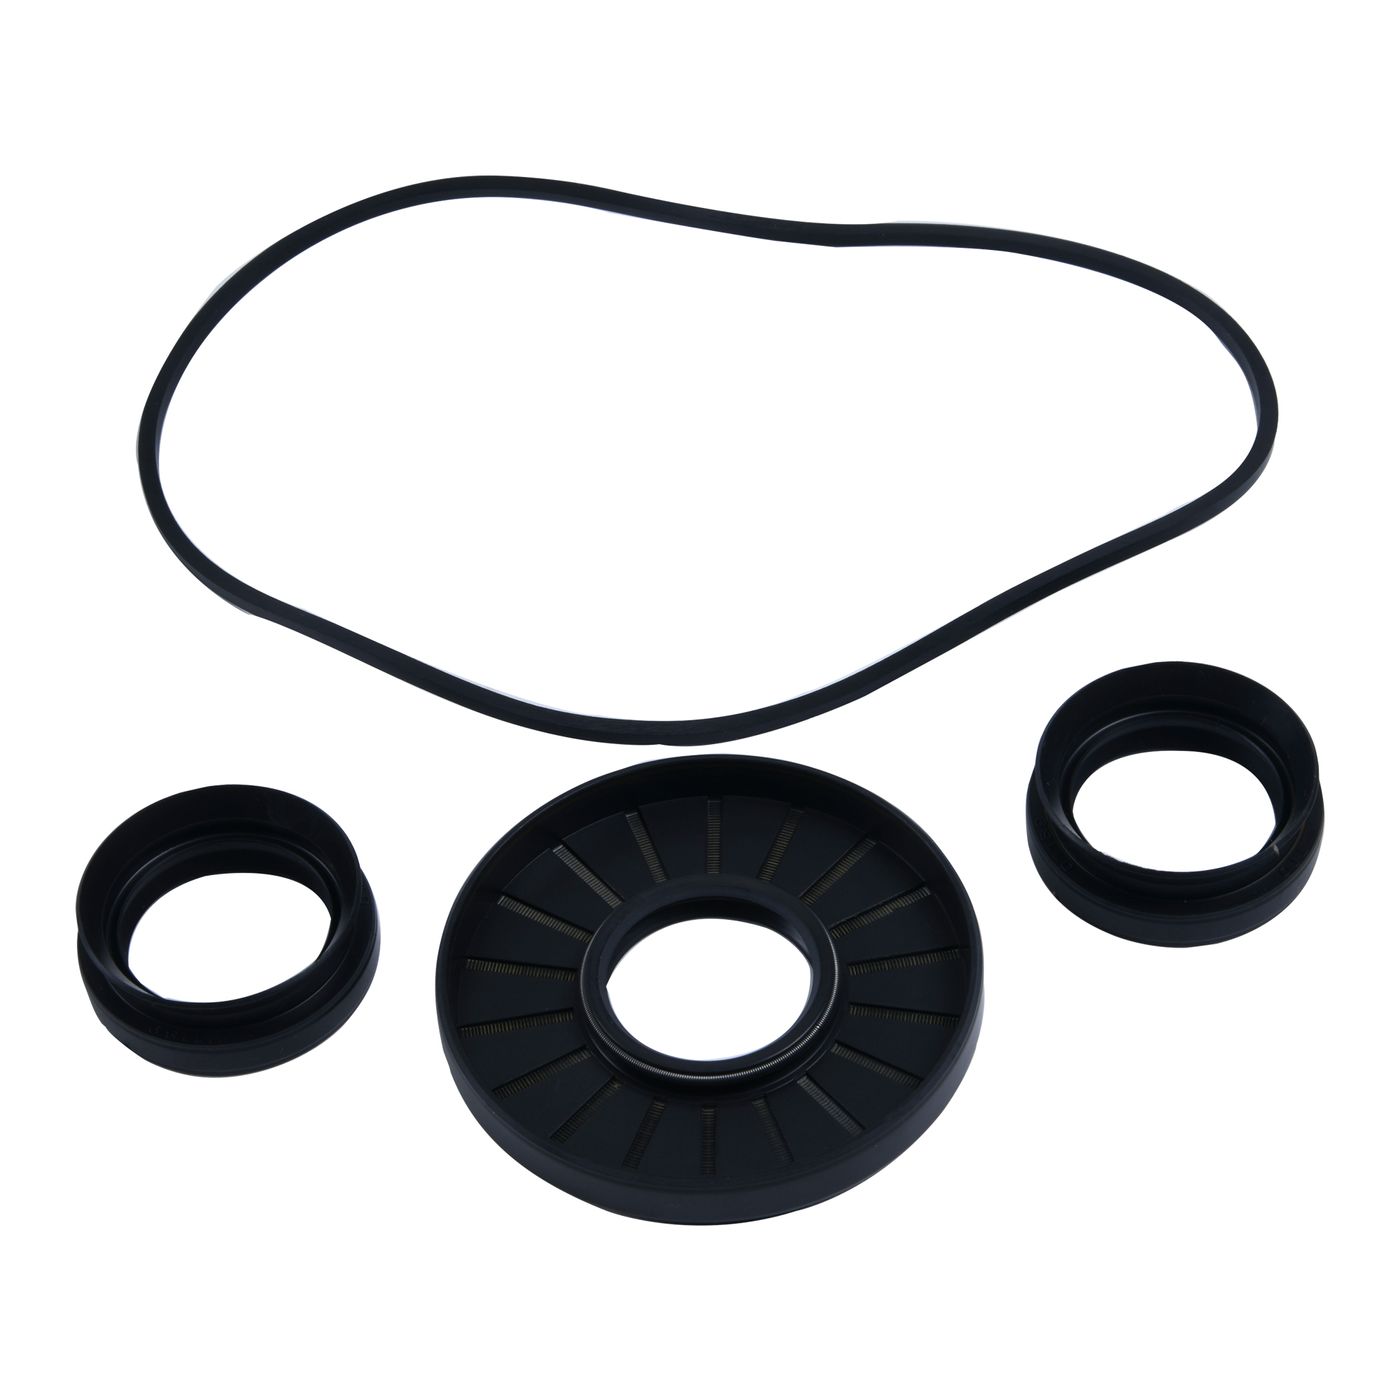 Wrp Diff Seal Kits - WRP252133-5 image